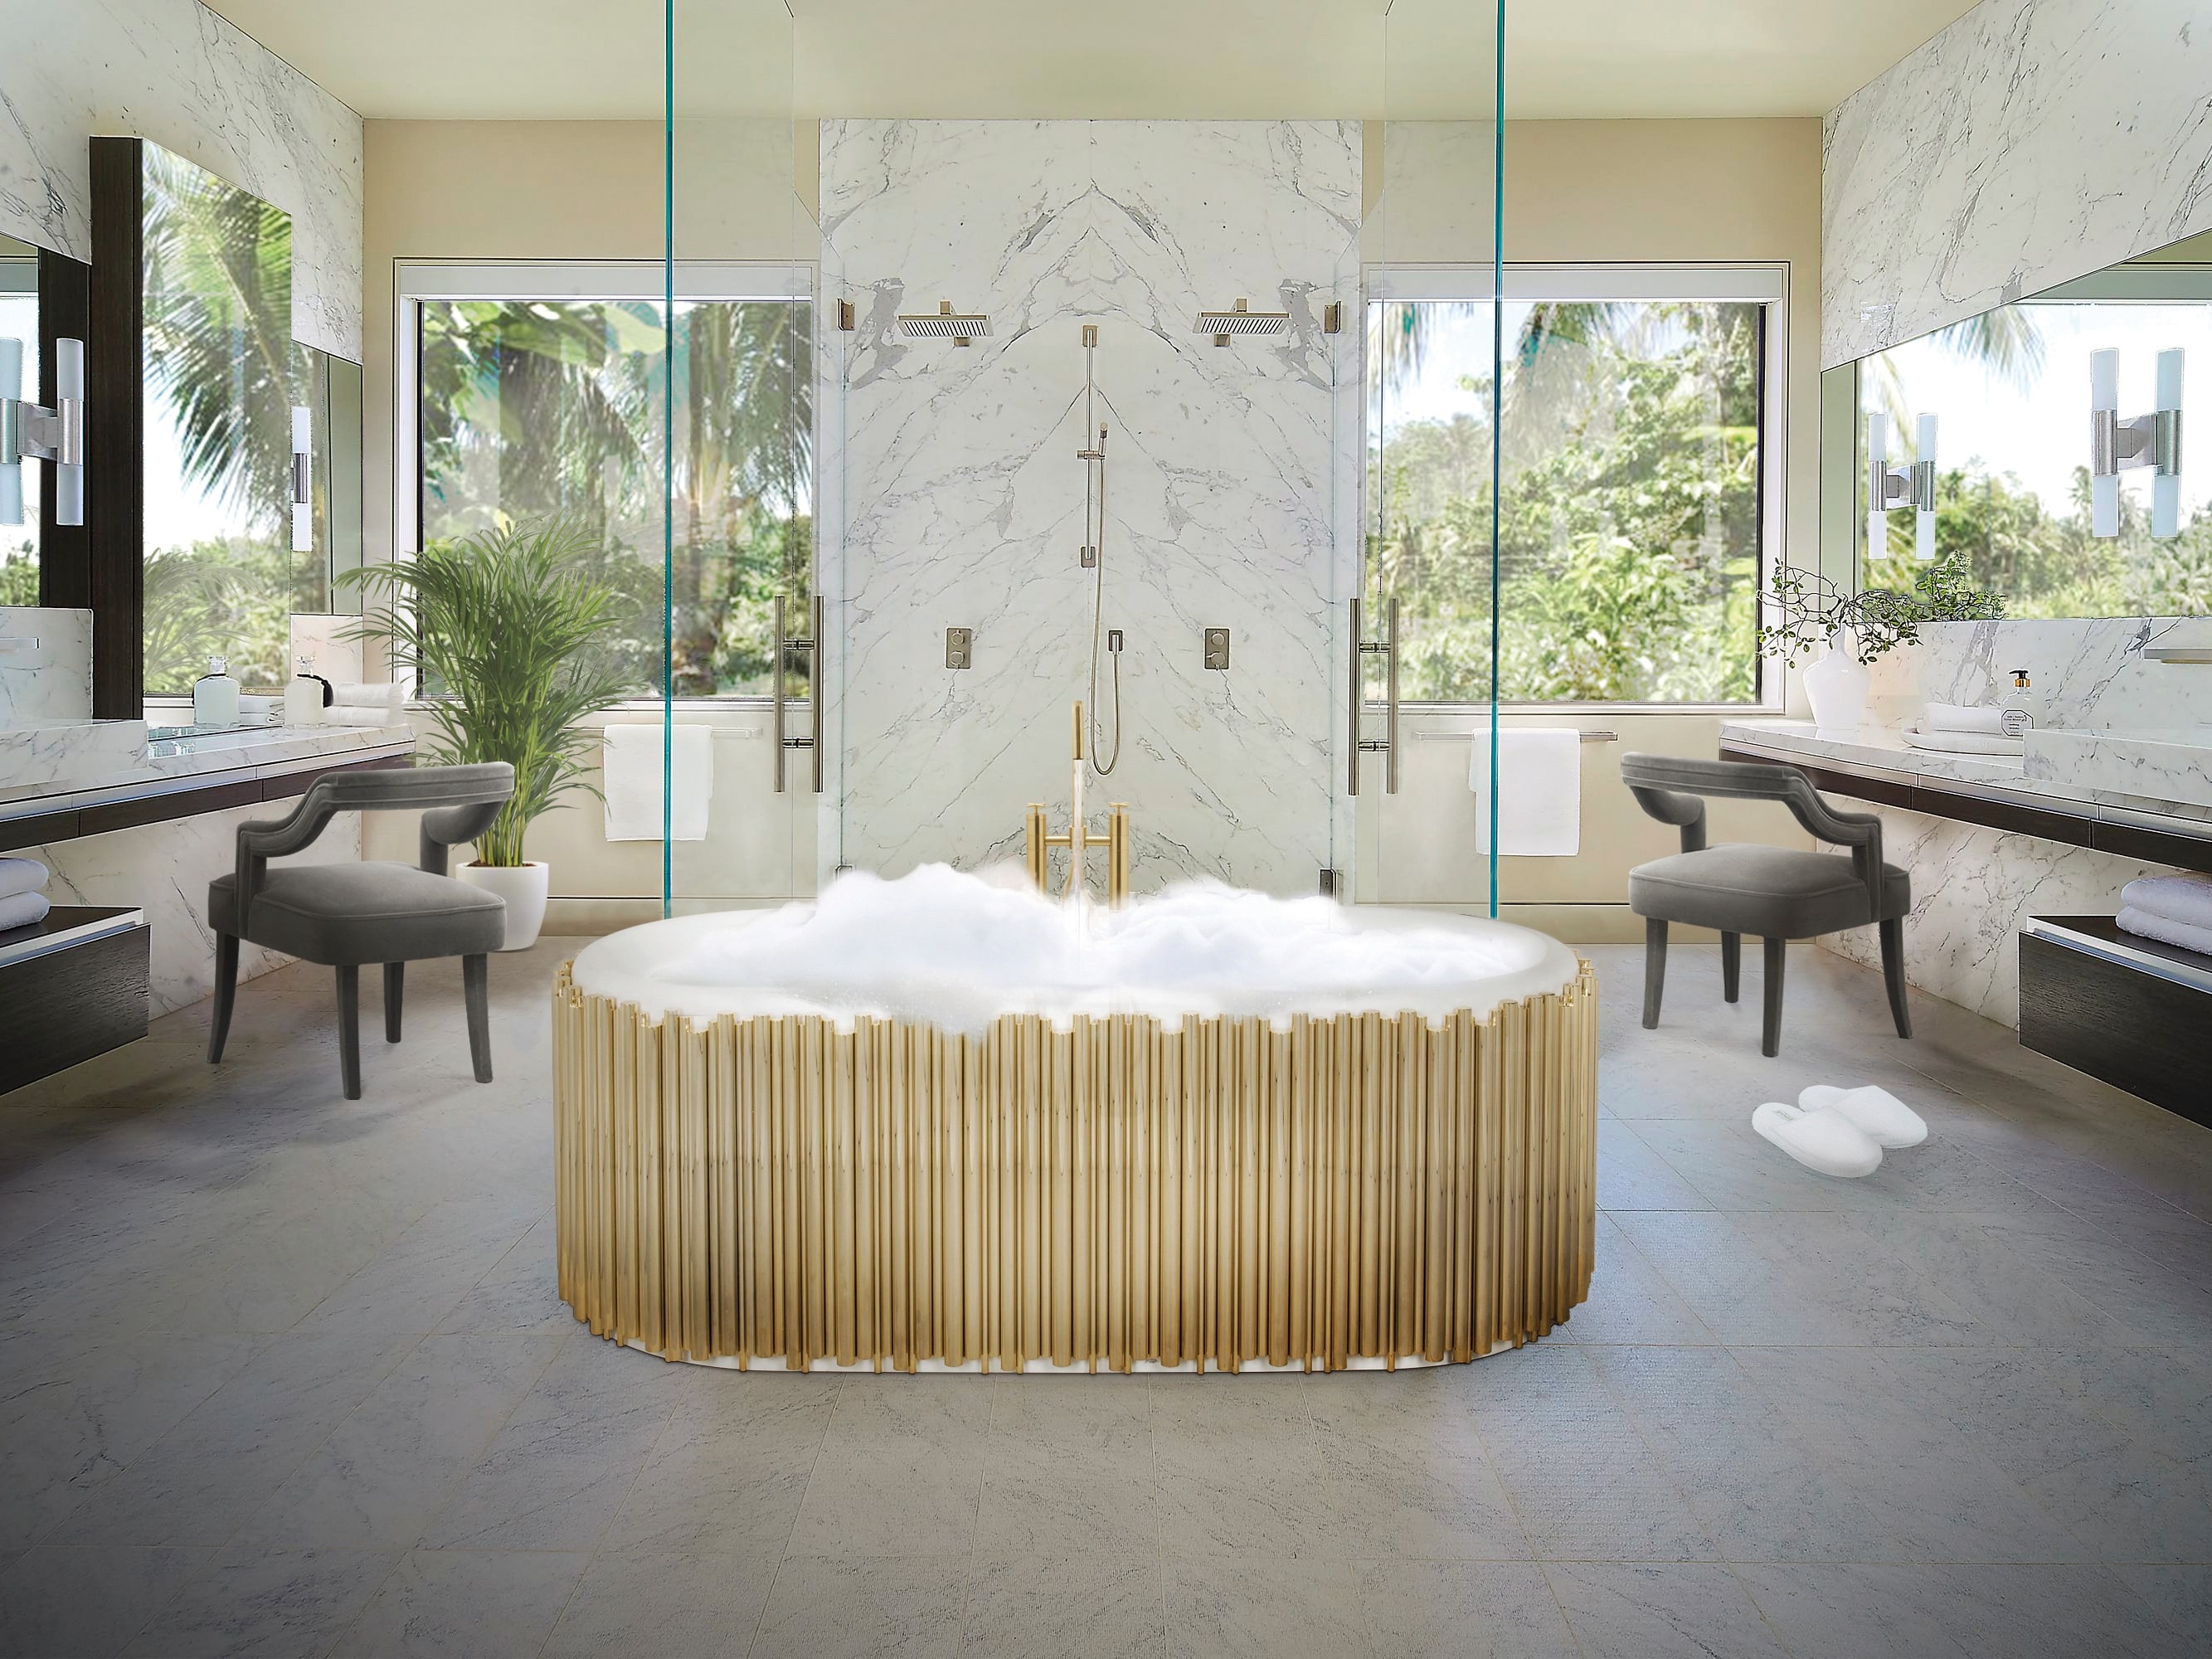 Relaxing Oasis With Dazzling Bathtub - Home'Society